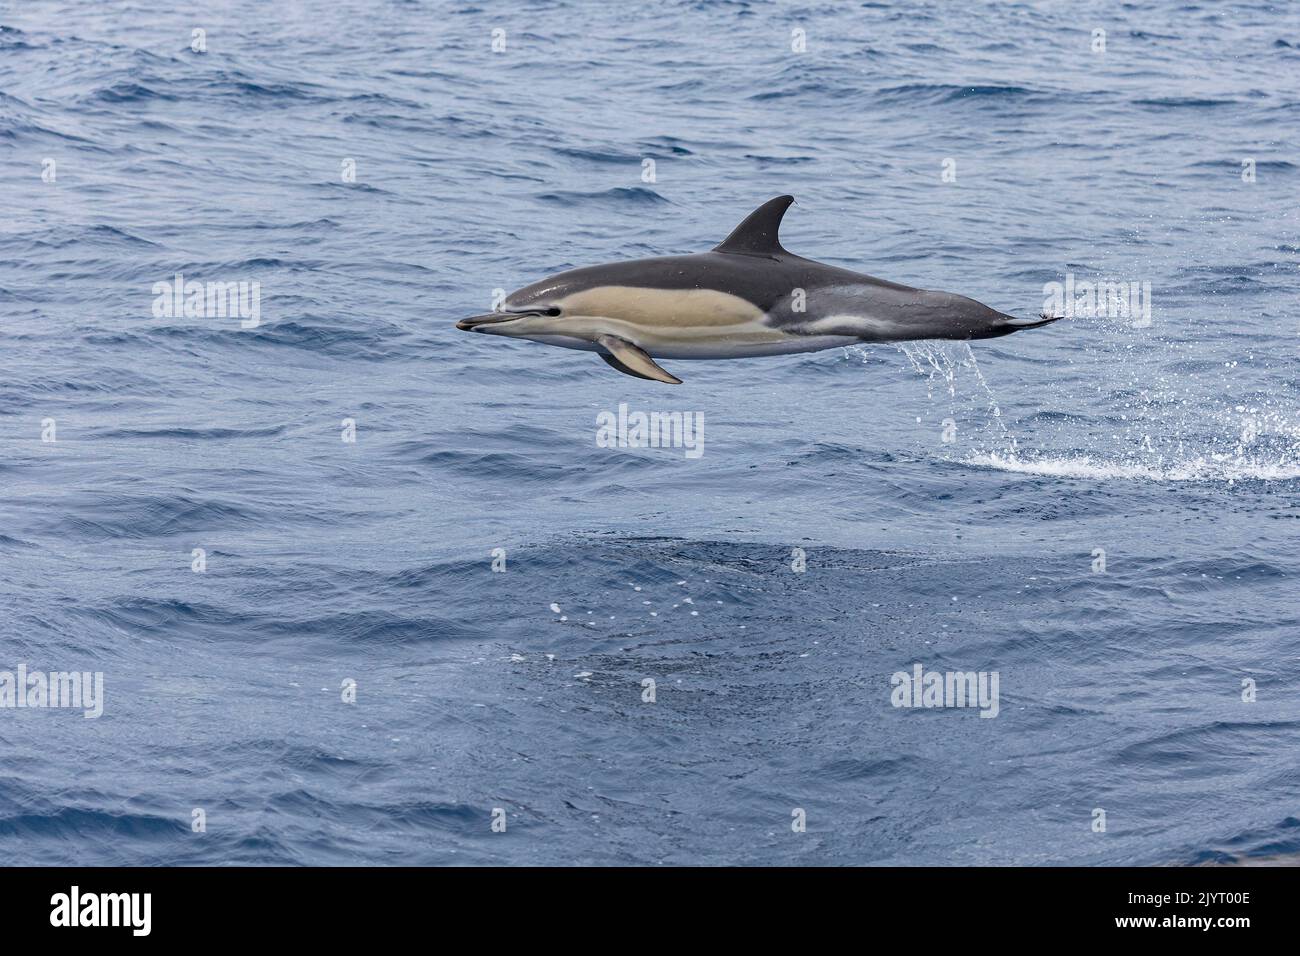 Common dolphin (Delphinus delphis) jumping over the waves. They are the most abundant cetacean in the world, with a global population of about six million, Horta island (Faial), Azores, Portugal, Atlantic ocean Stock Photo